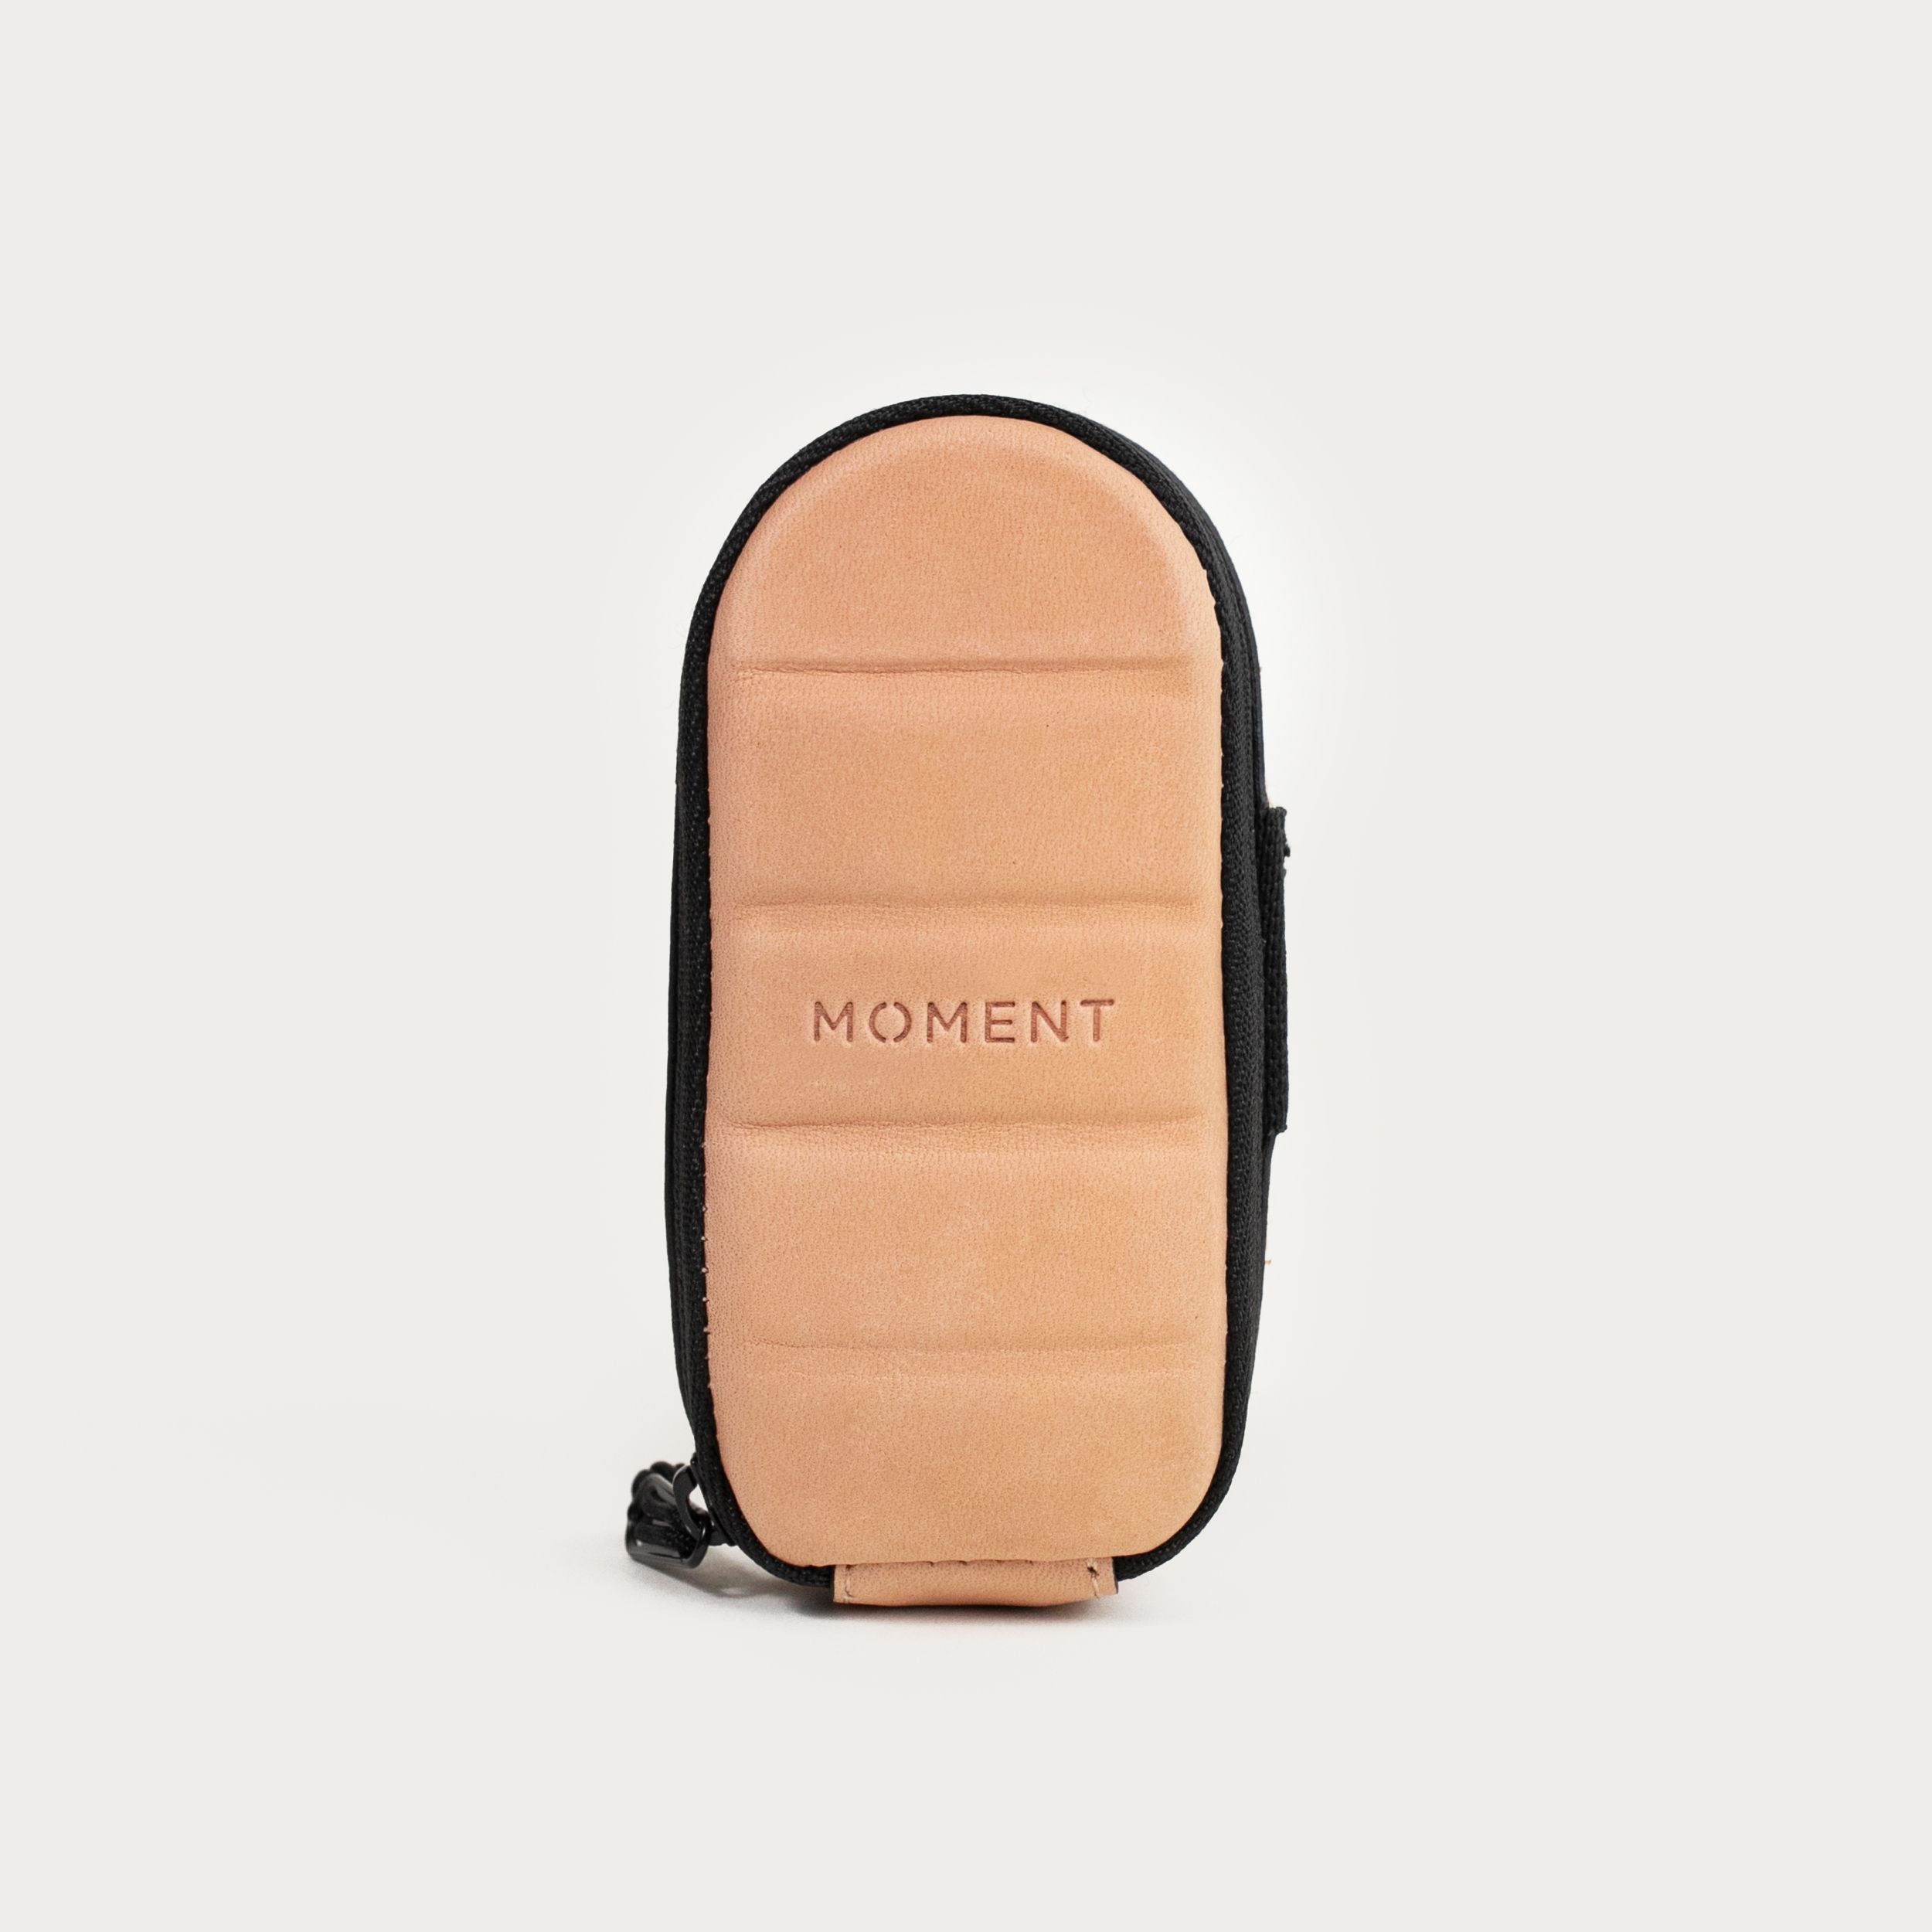 Moment Weatherproof Mobile Lens Carrying Case - 2 Lenses | Moment